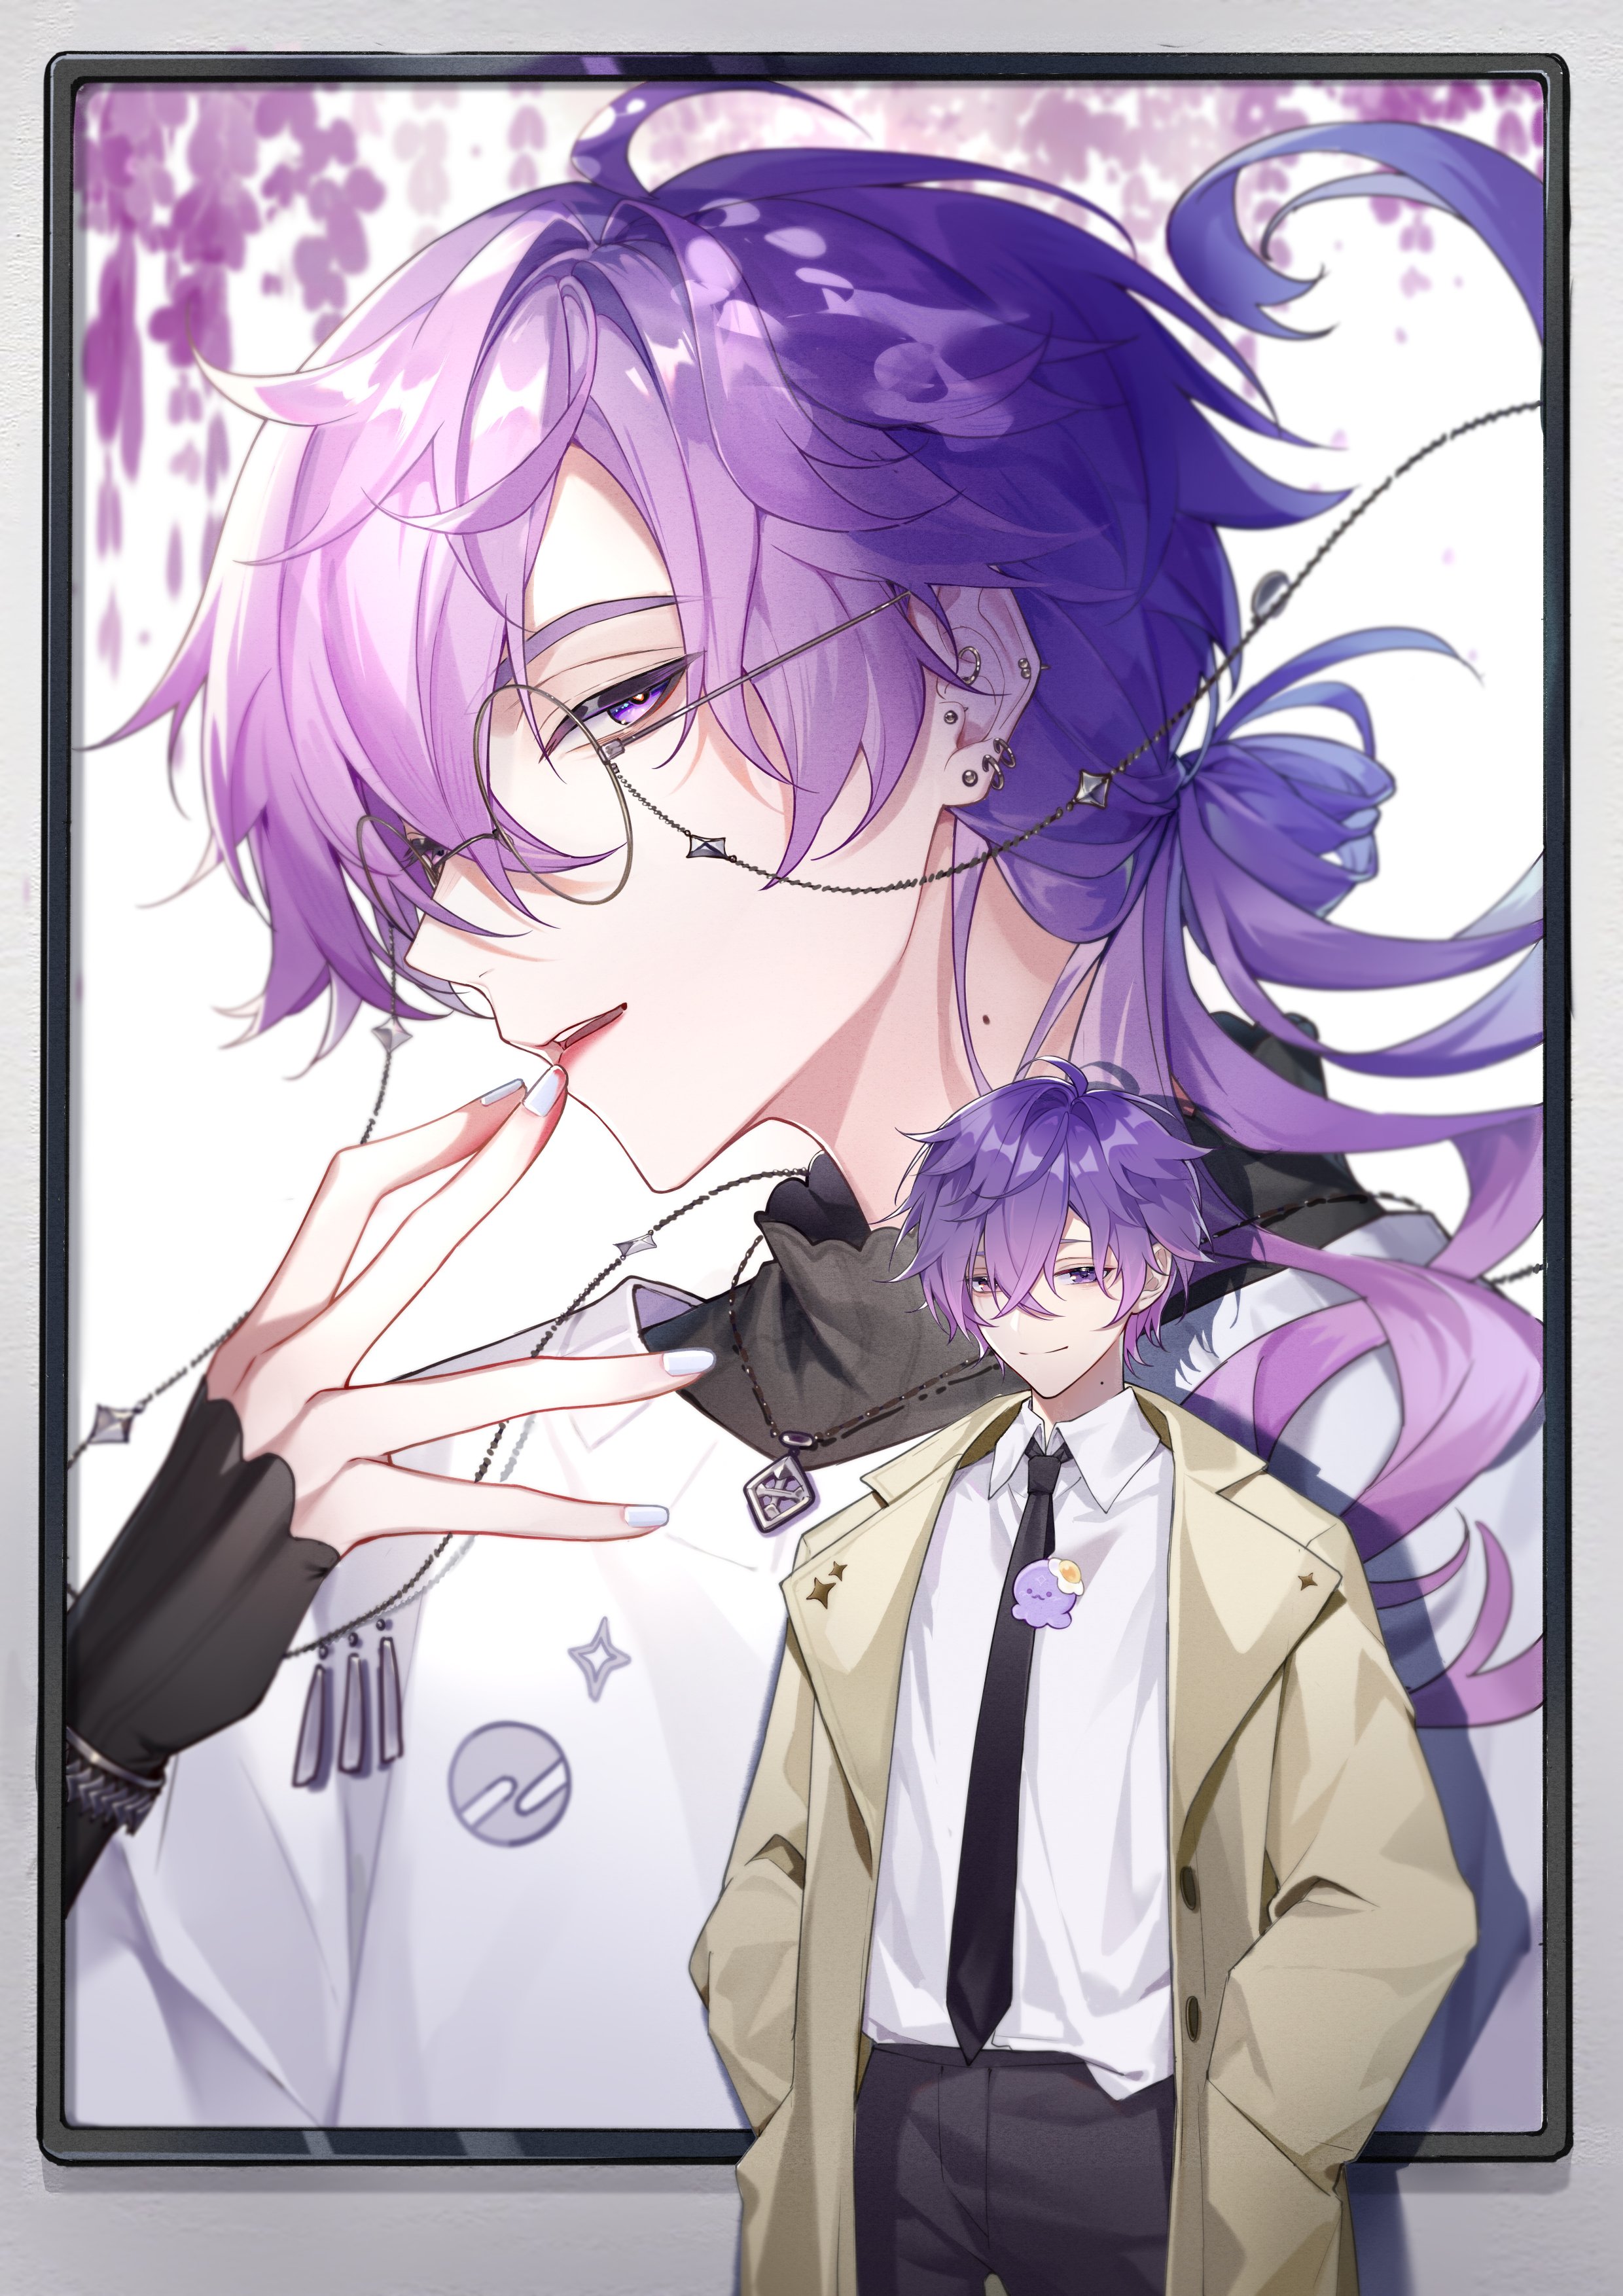 The Hottest Anime Guy With Purple Hair